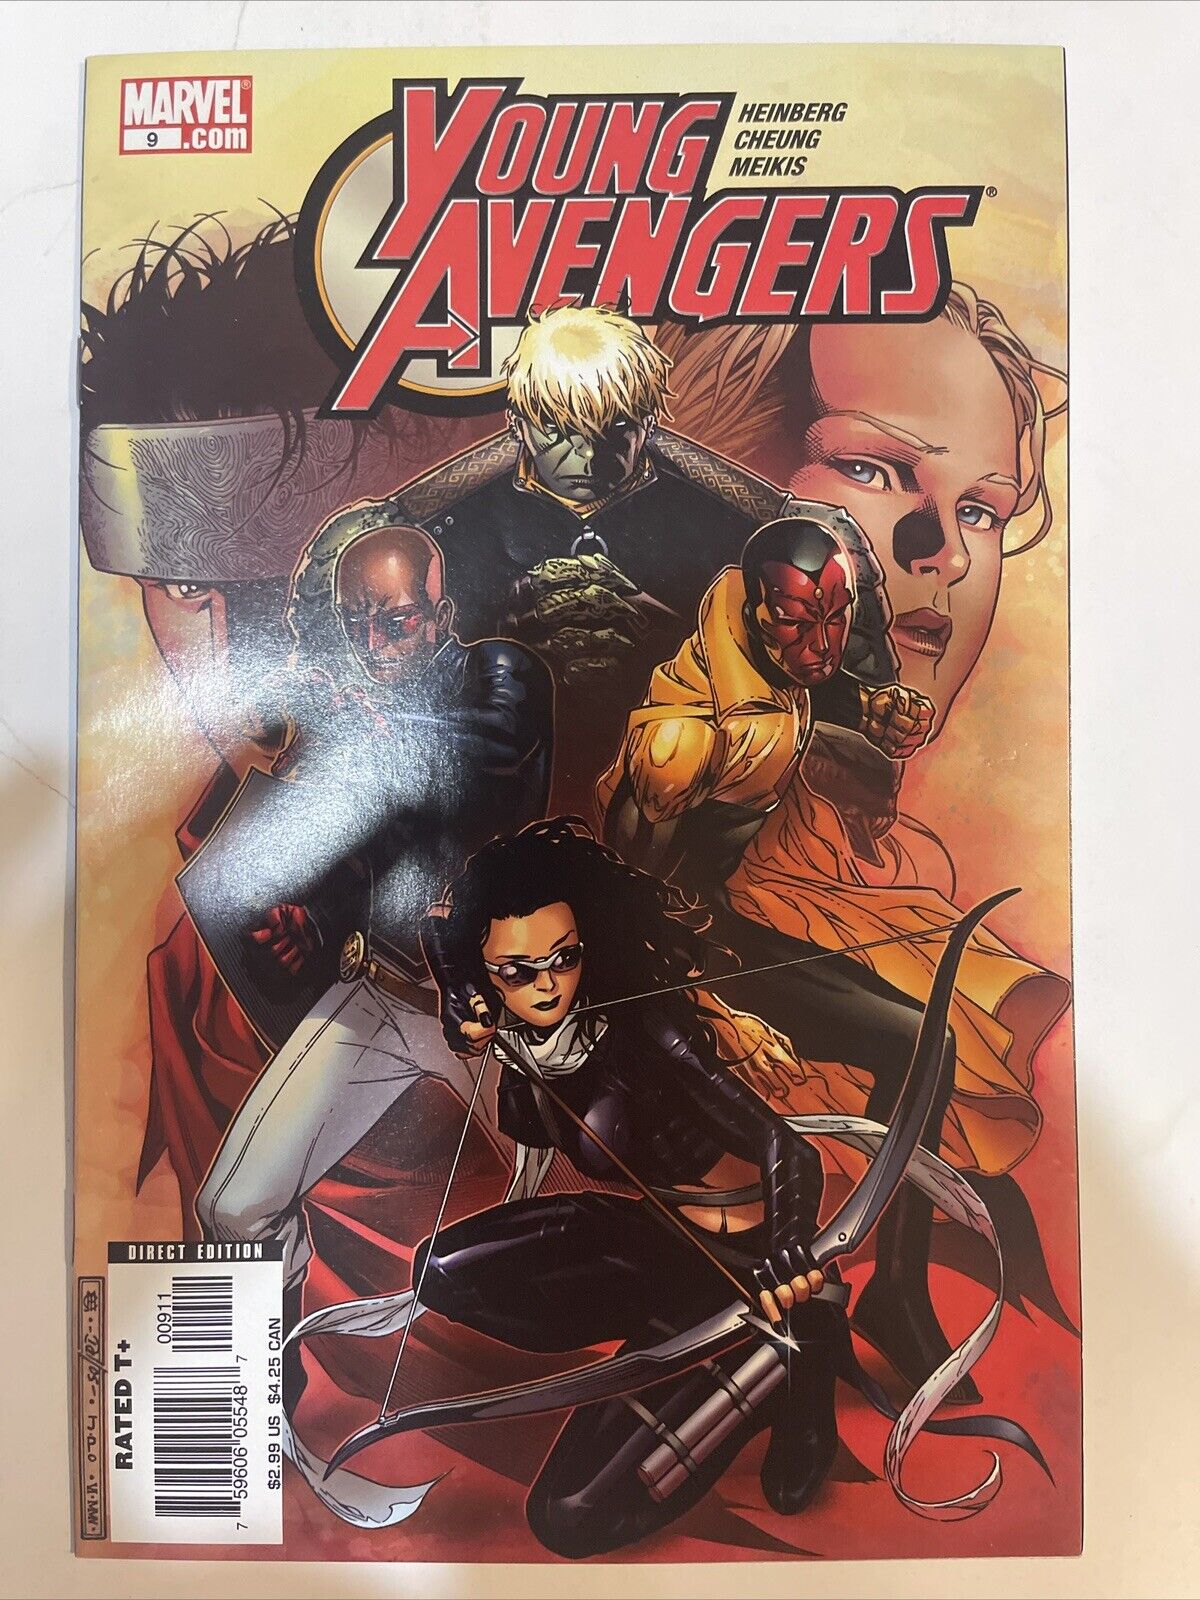 Young Avengers # 9 - 1st Kate Bishop as Hawkeye cover NM/VF Marvel 2005 Hot Key